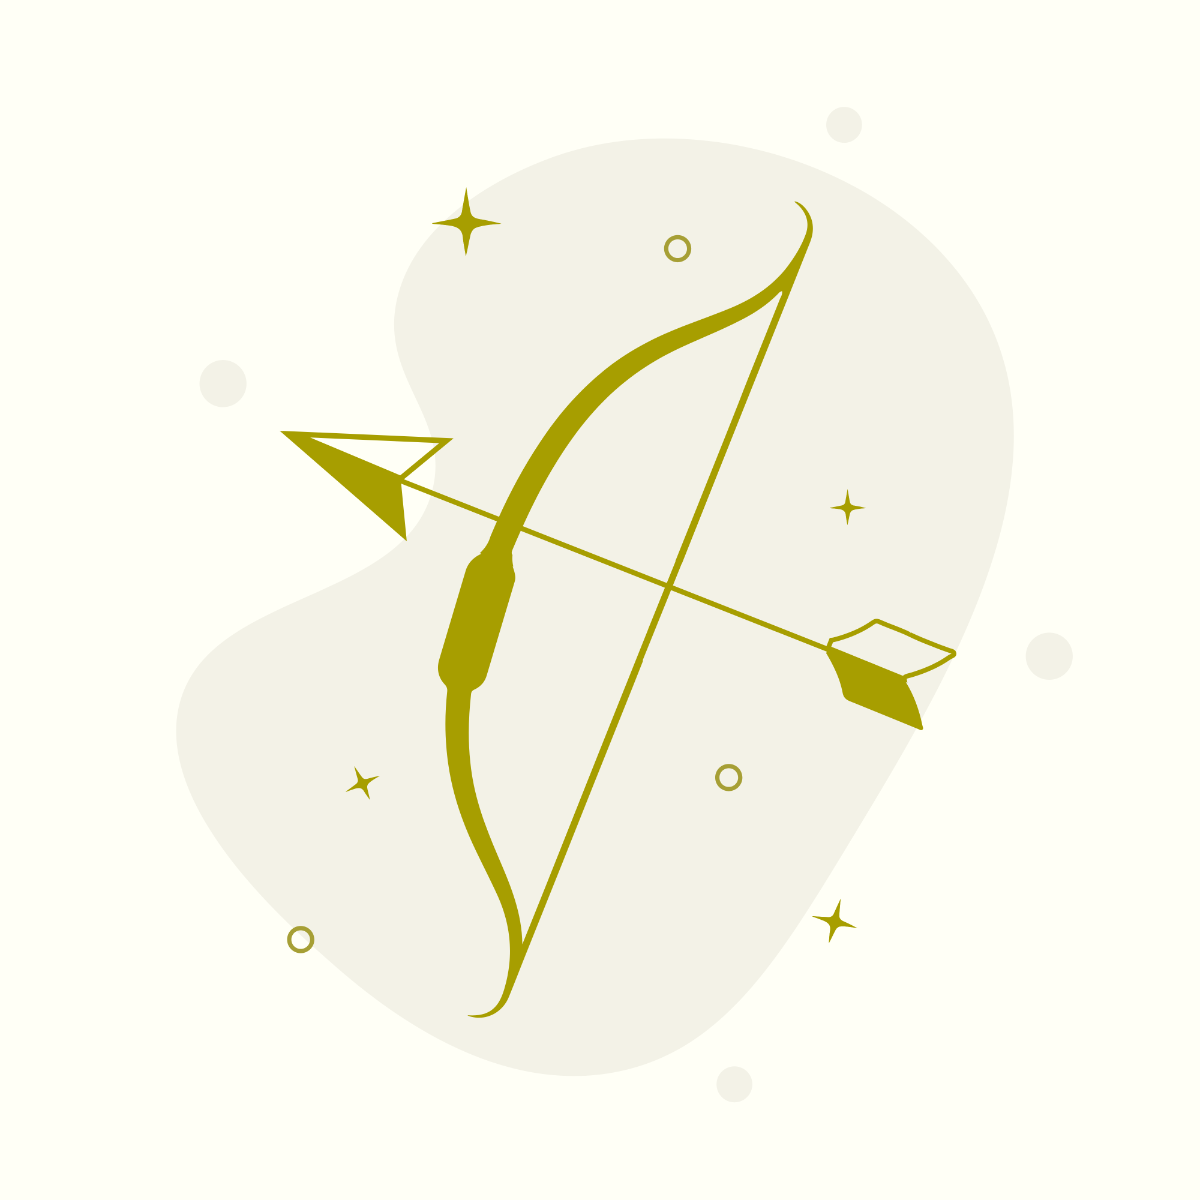 Free Bow And Arrow Vector Template